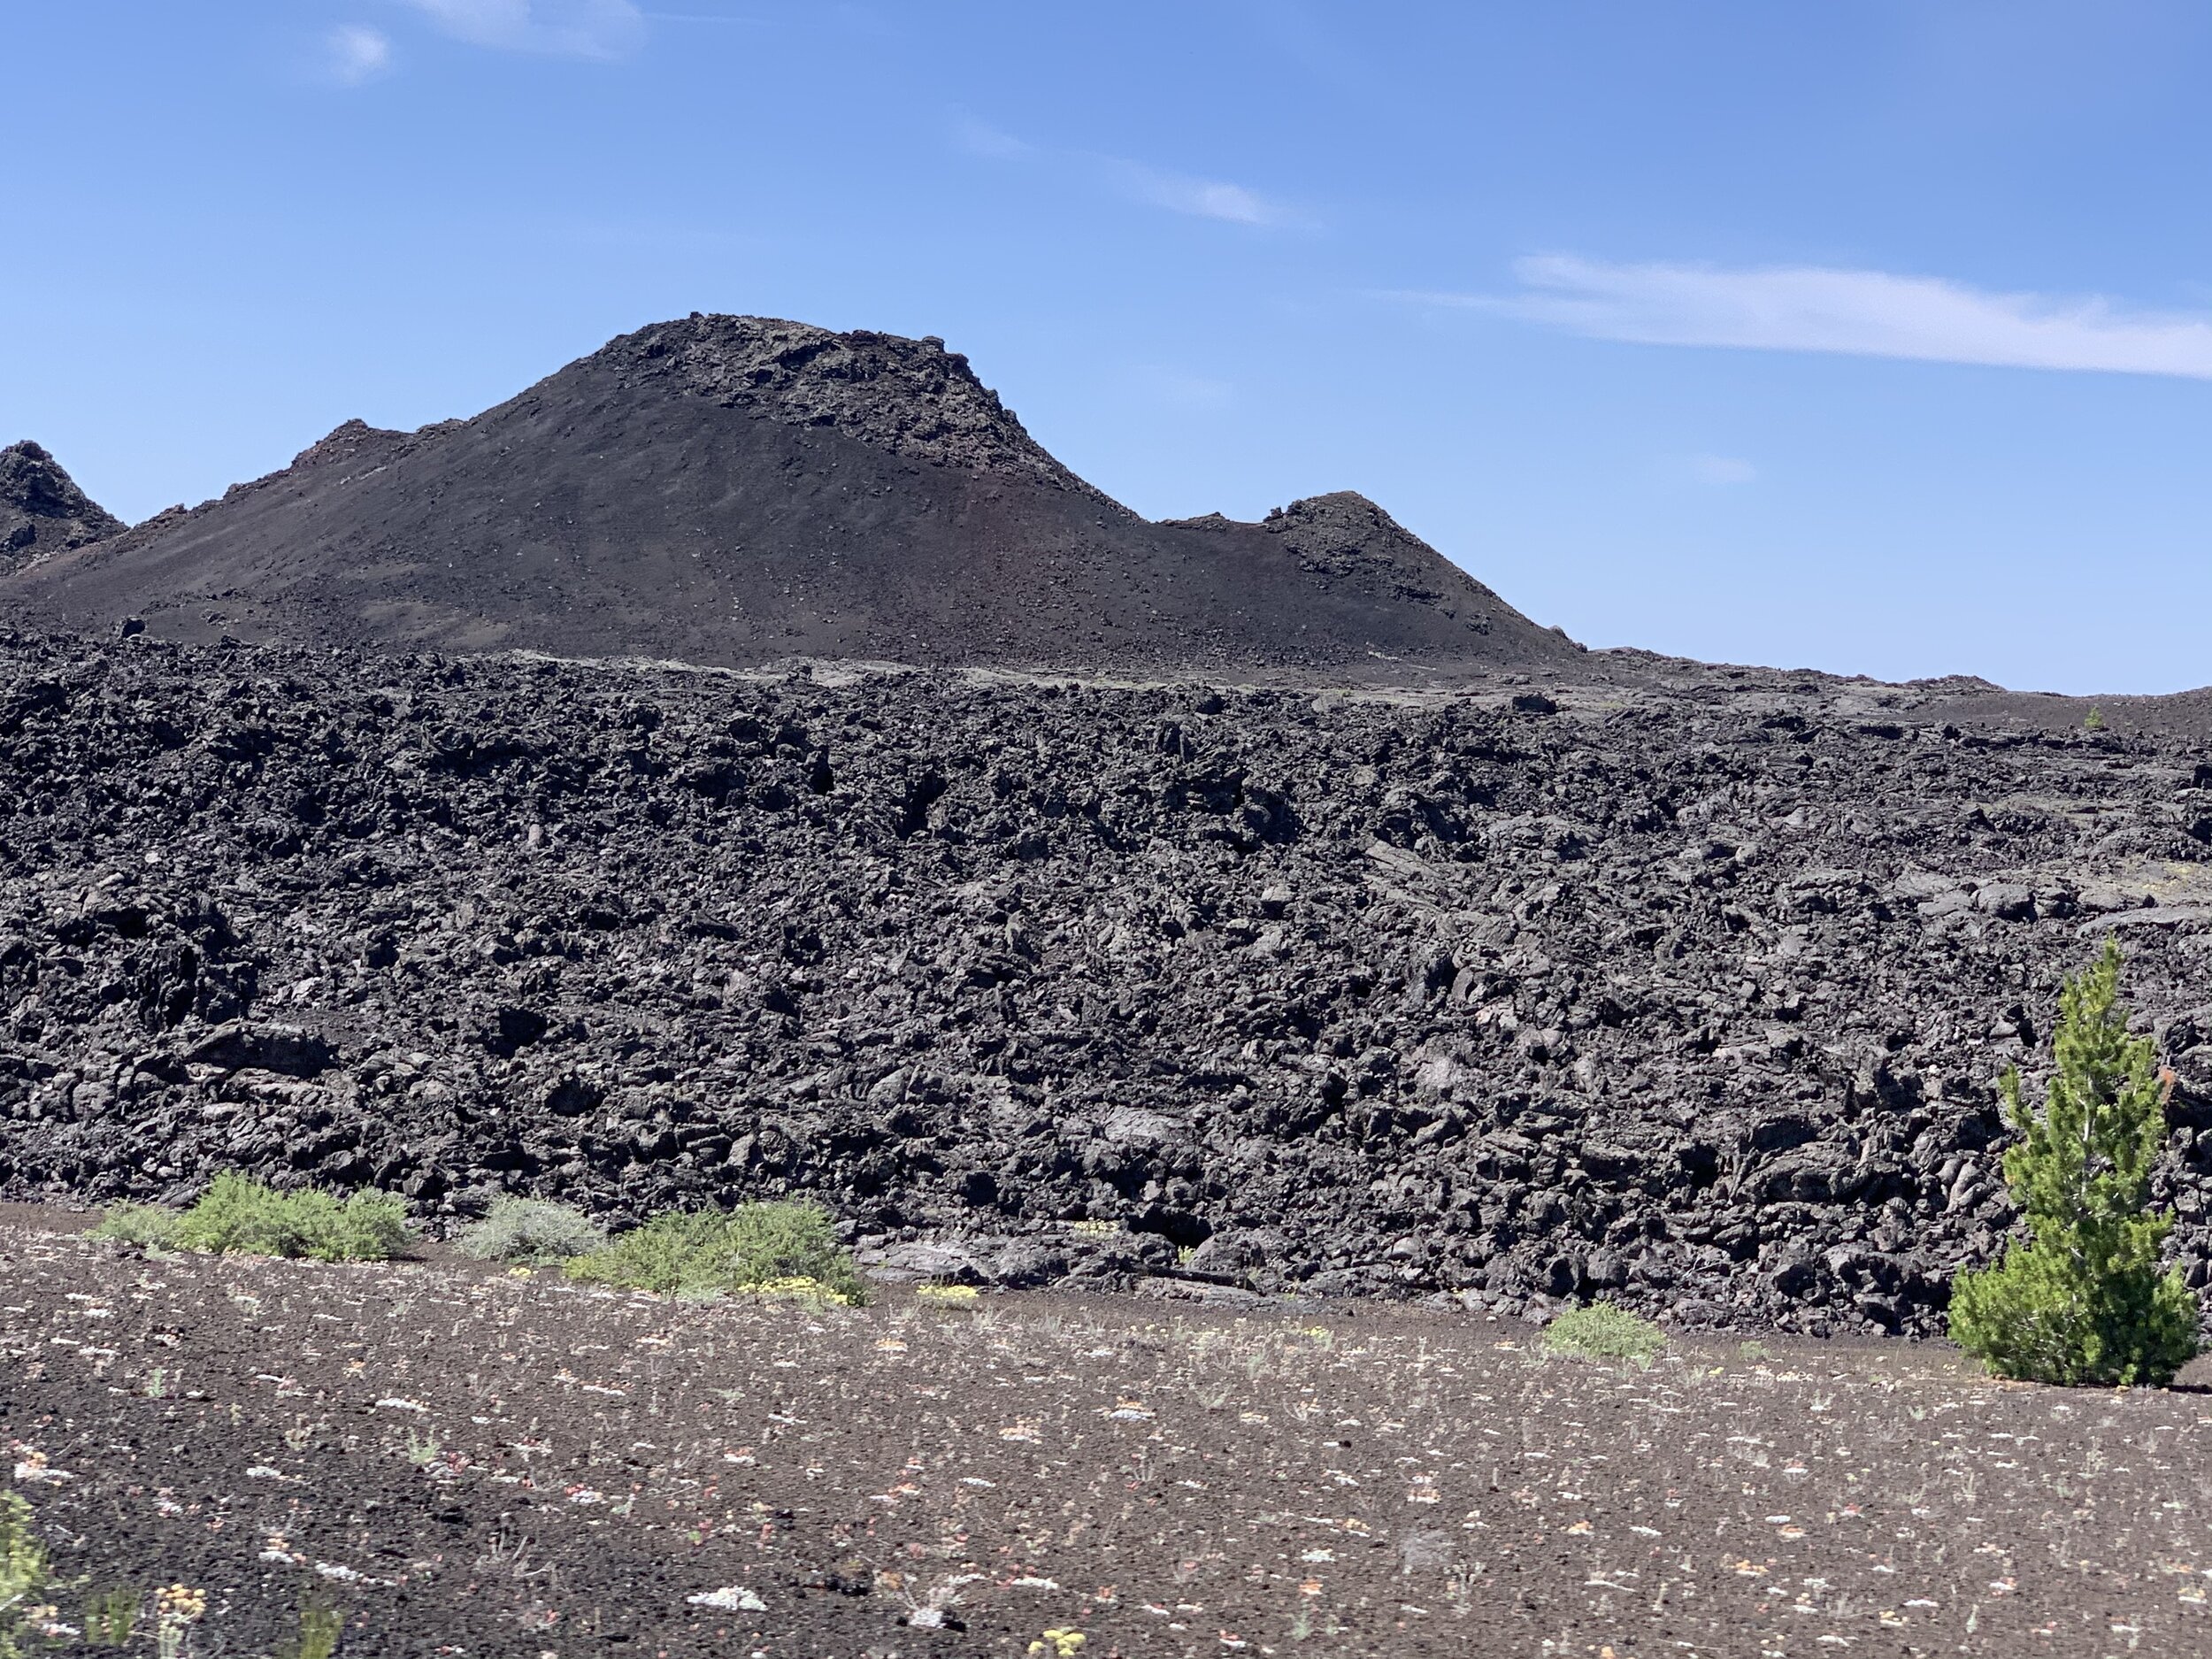  En route to our next destination, we stopped at Craters of the Moon National Monument &amp; Preserve. This 1,117-square mile area in central Idaho was created by the lava flow of several volcanoes that erupted between 15,000 and 2,000 years ago. Thi